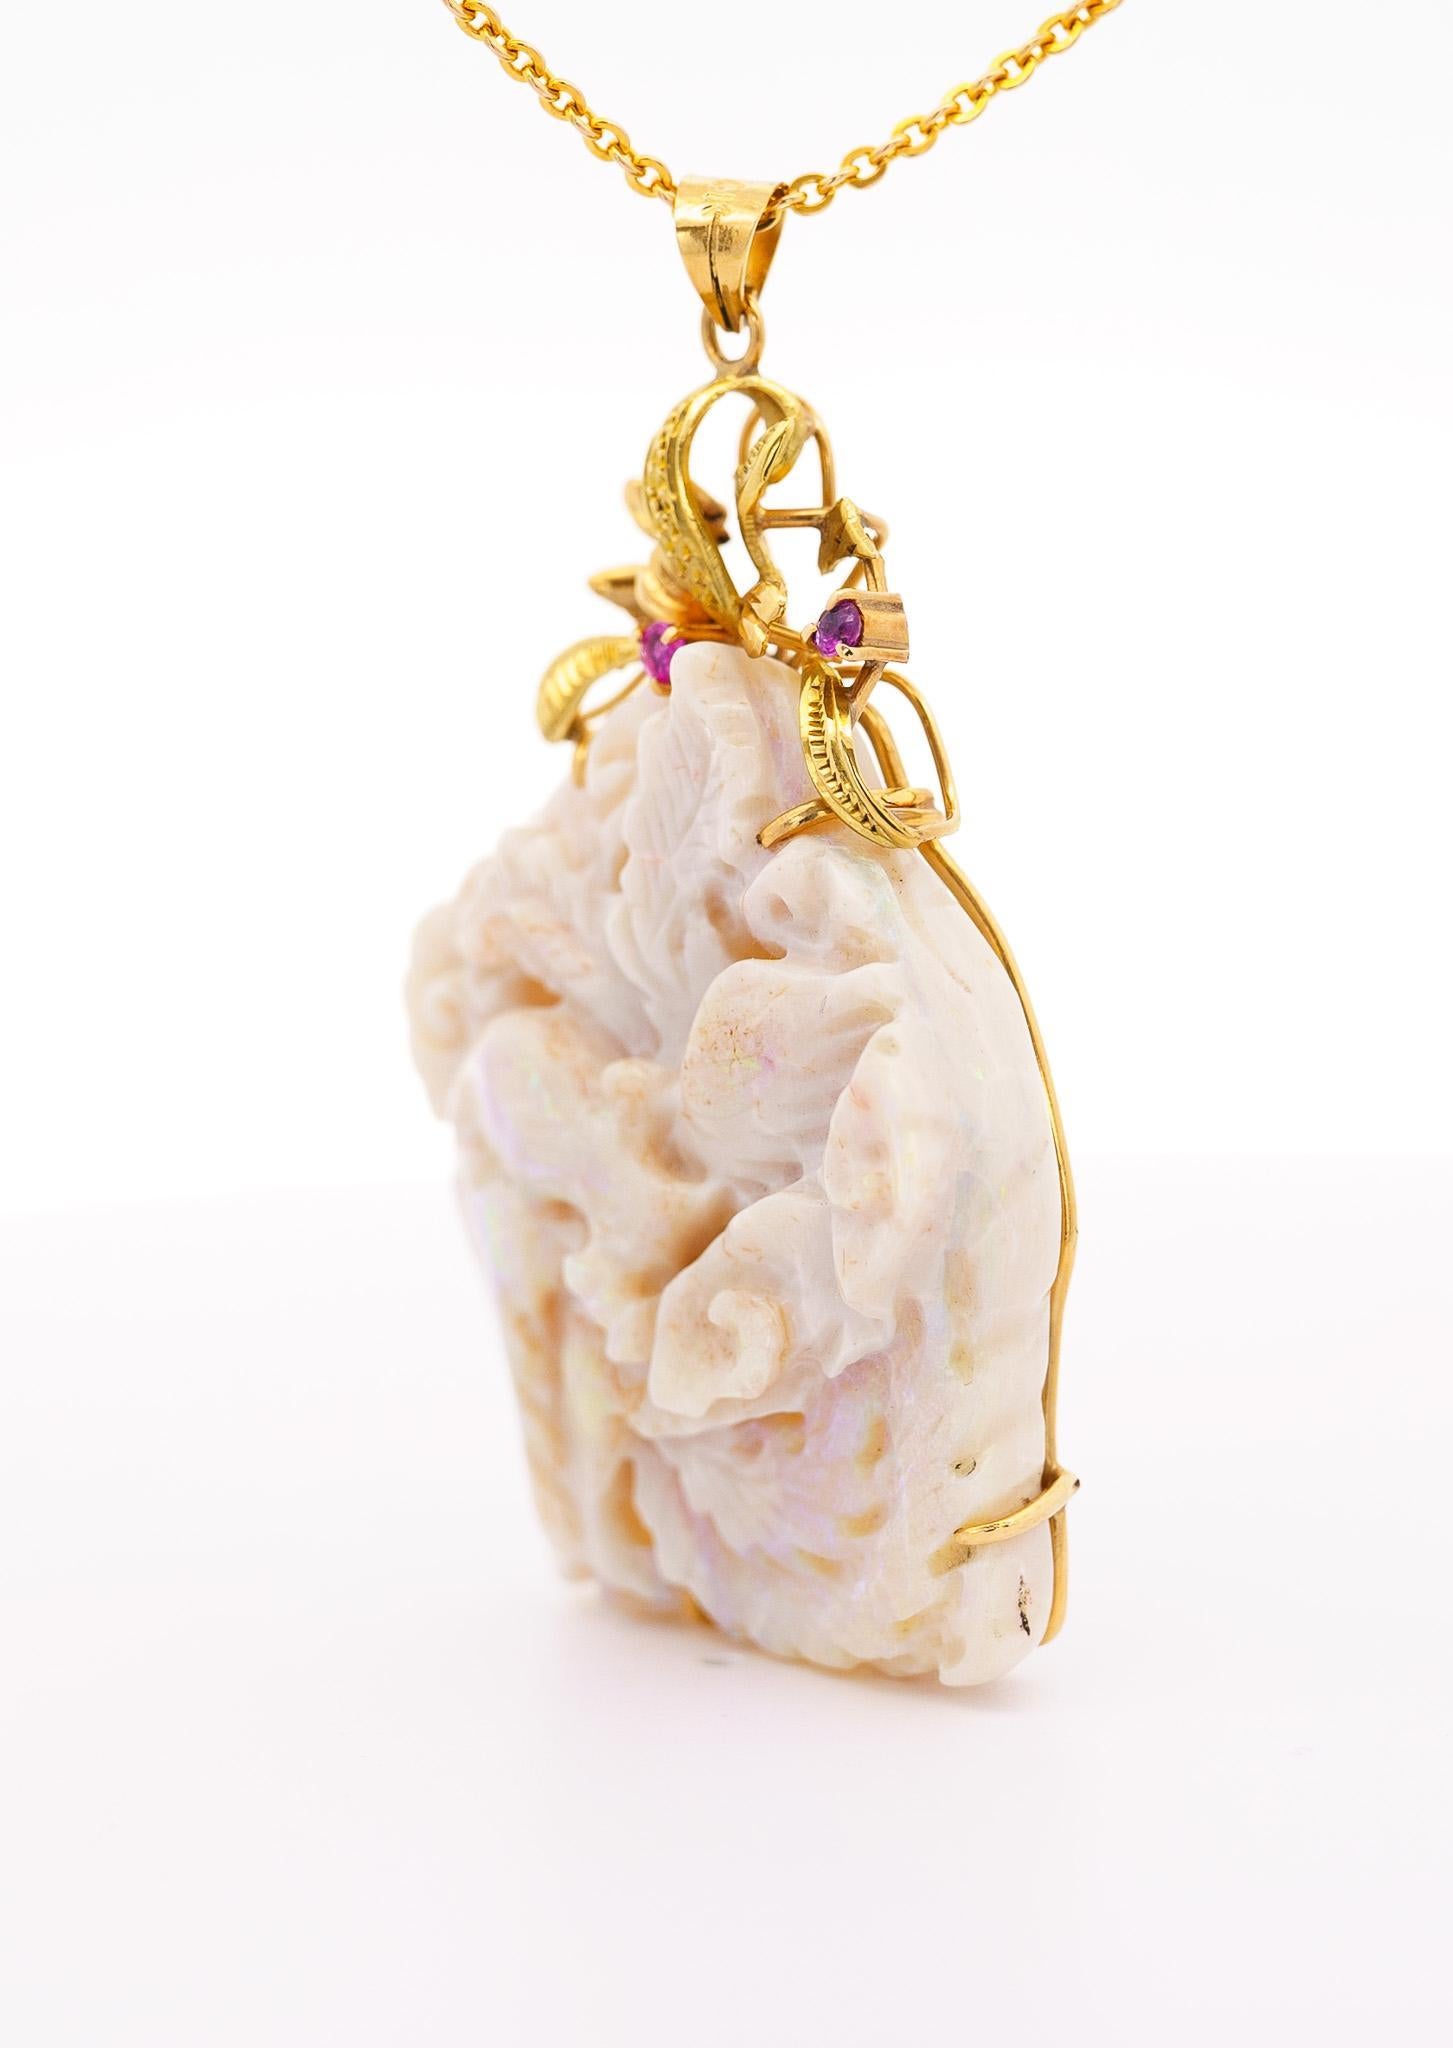 Vintage 40 Carat Natural Carved Opal in 14K Yellow Gold Floral Frame Pendant Necklace. The opal is carved to perfection and full of luster. Fixed with a 30 inch 14k solid gold cable chain and 14k gold frame. A one of a kind vintage masterpiece that